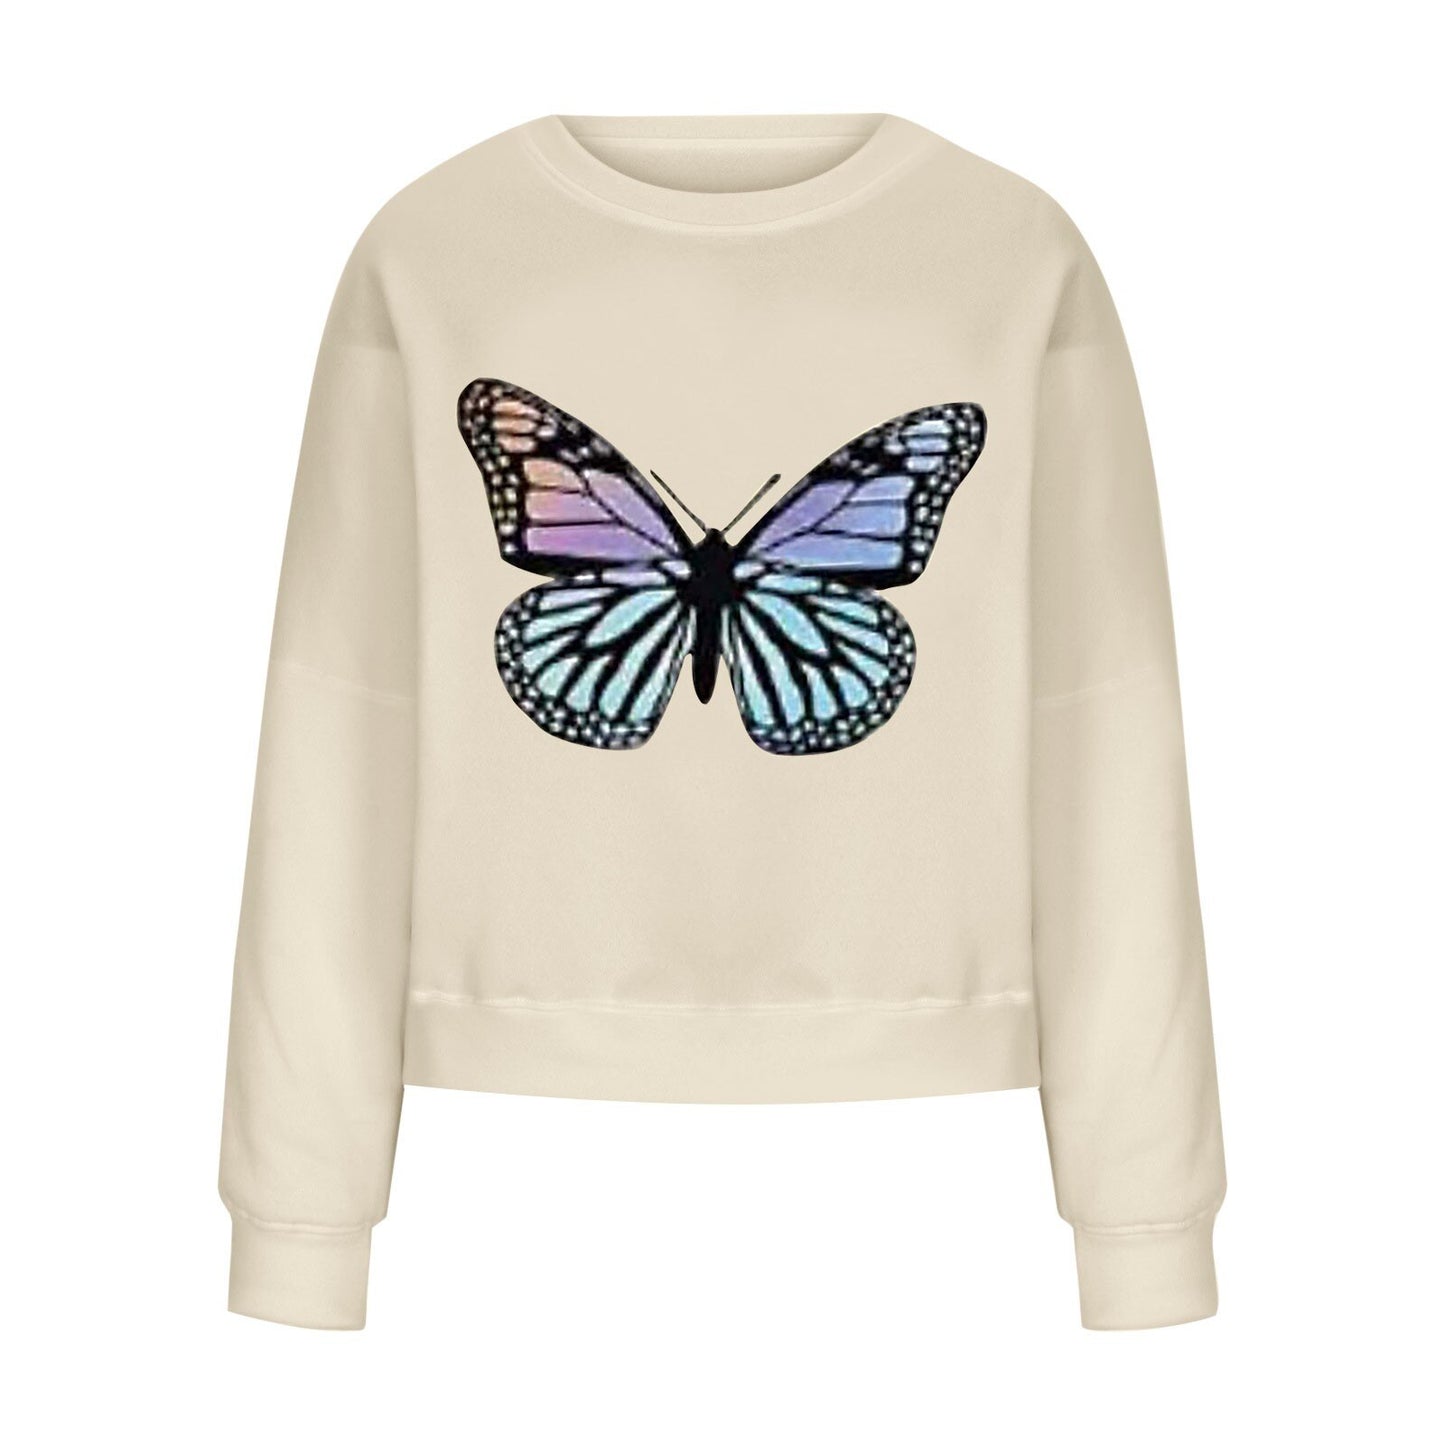 Butterfly Print Hoodie Round Neck Long Sleeve -Women’s